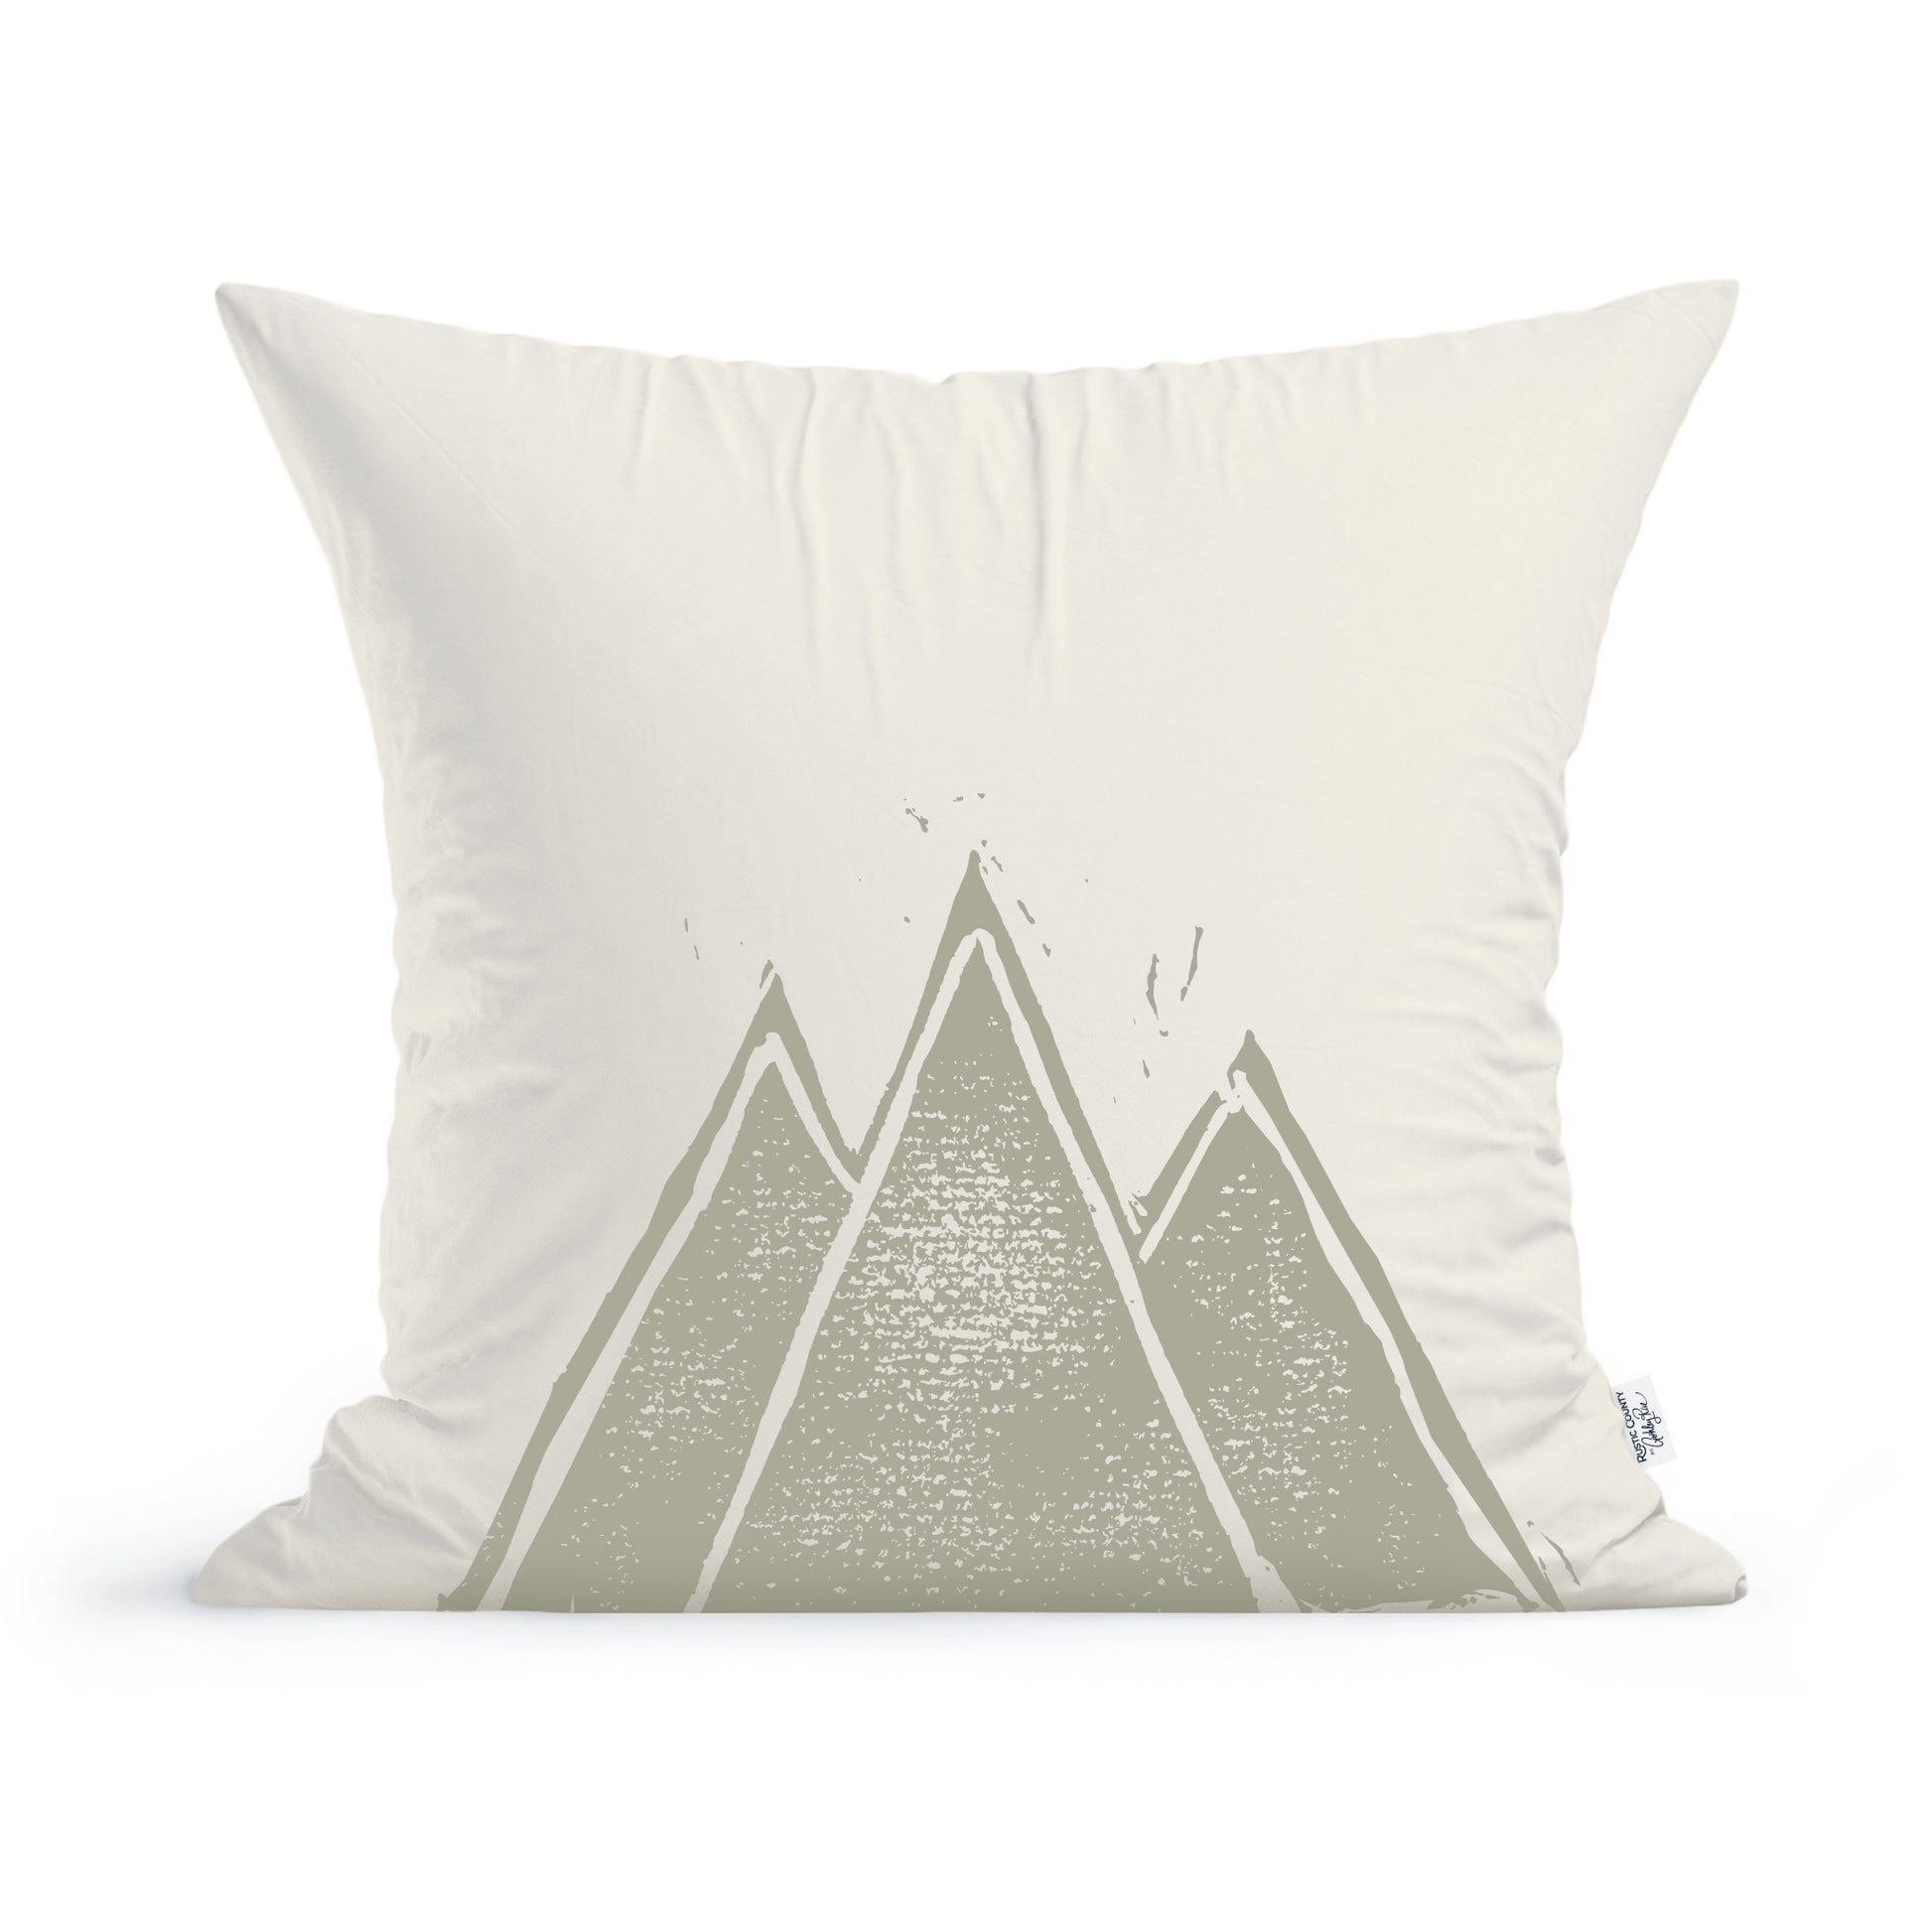 Maine Mountain Peaks Pillow by Rustic County, featuring a minimalist mountain peaks design in gray tones with a dotted texture, set against a plain white background.